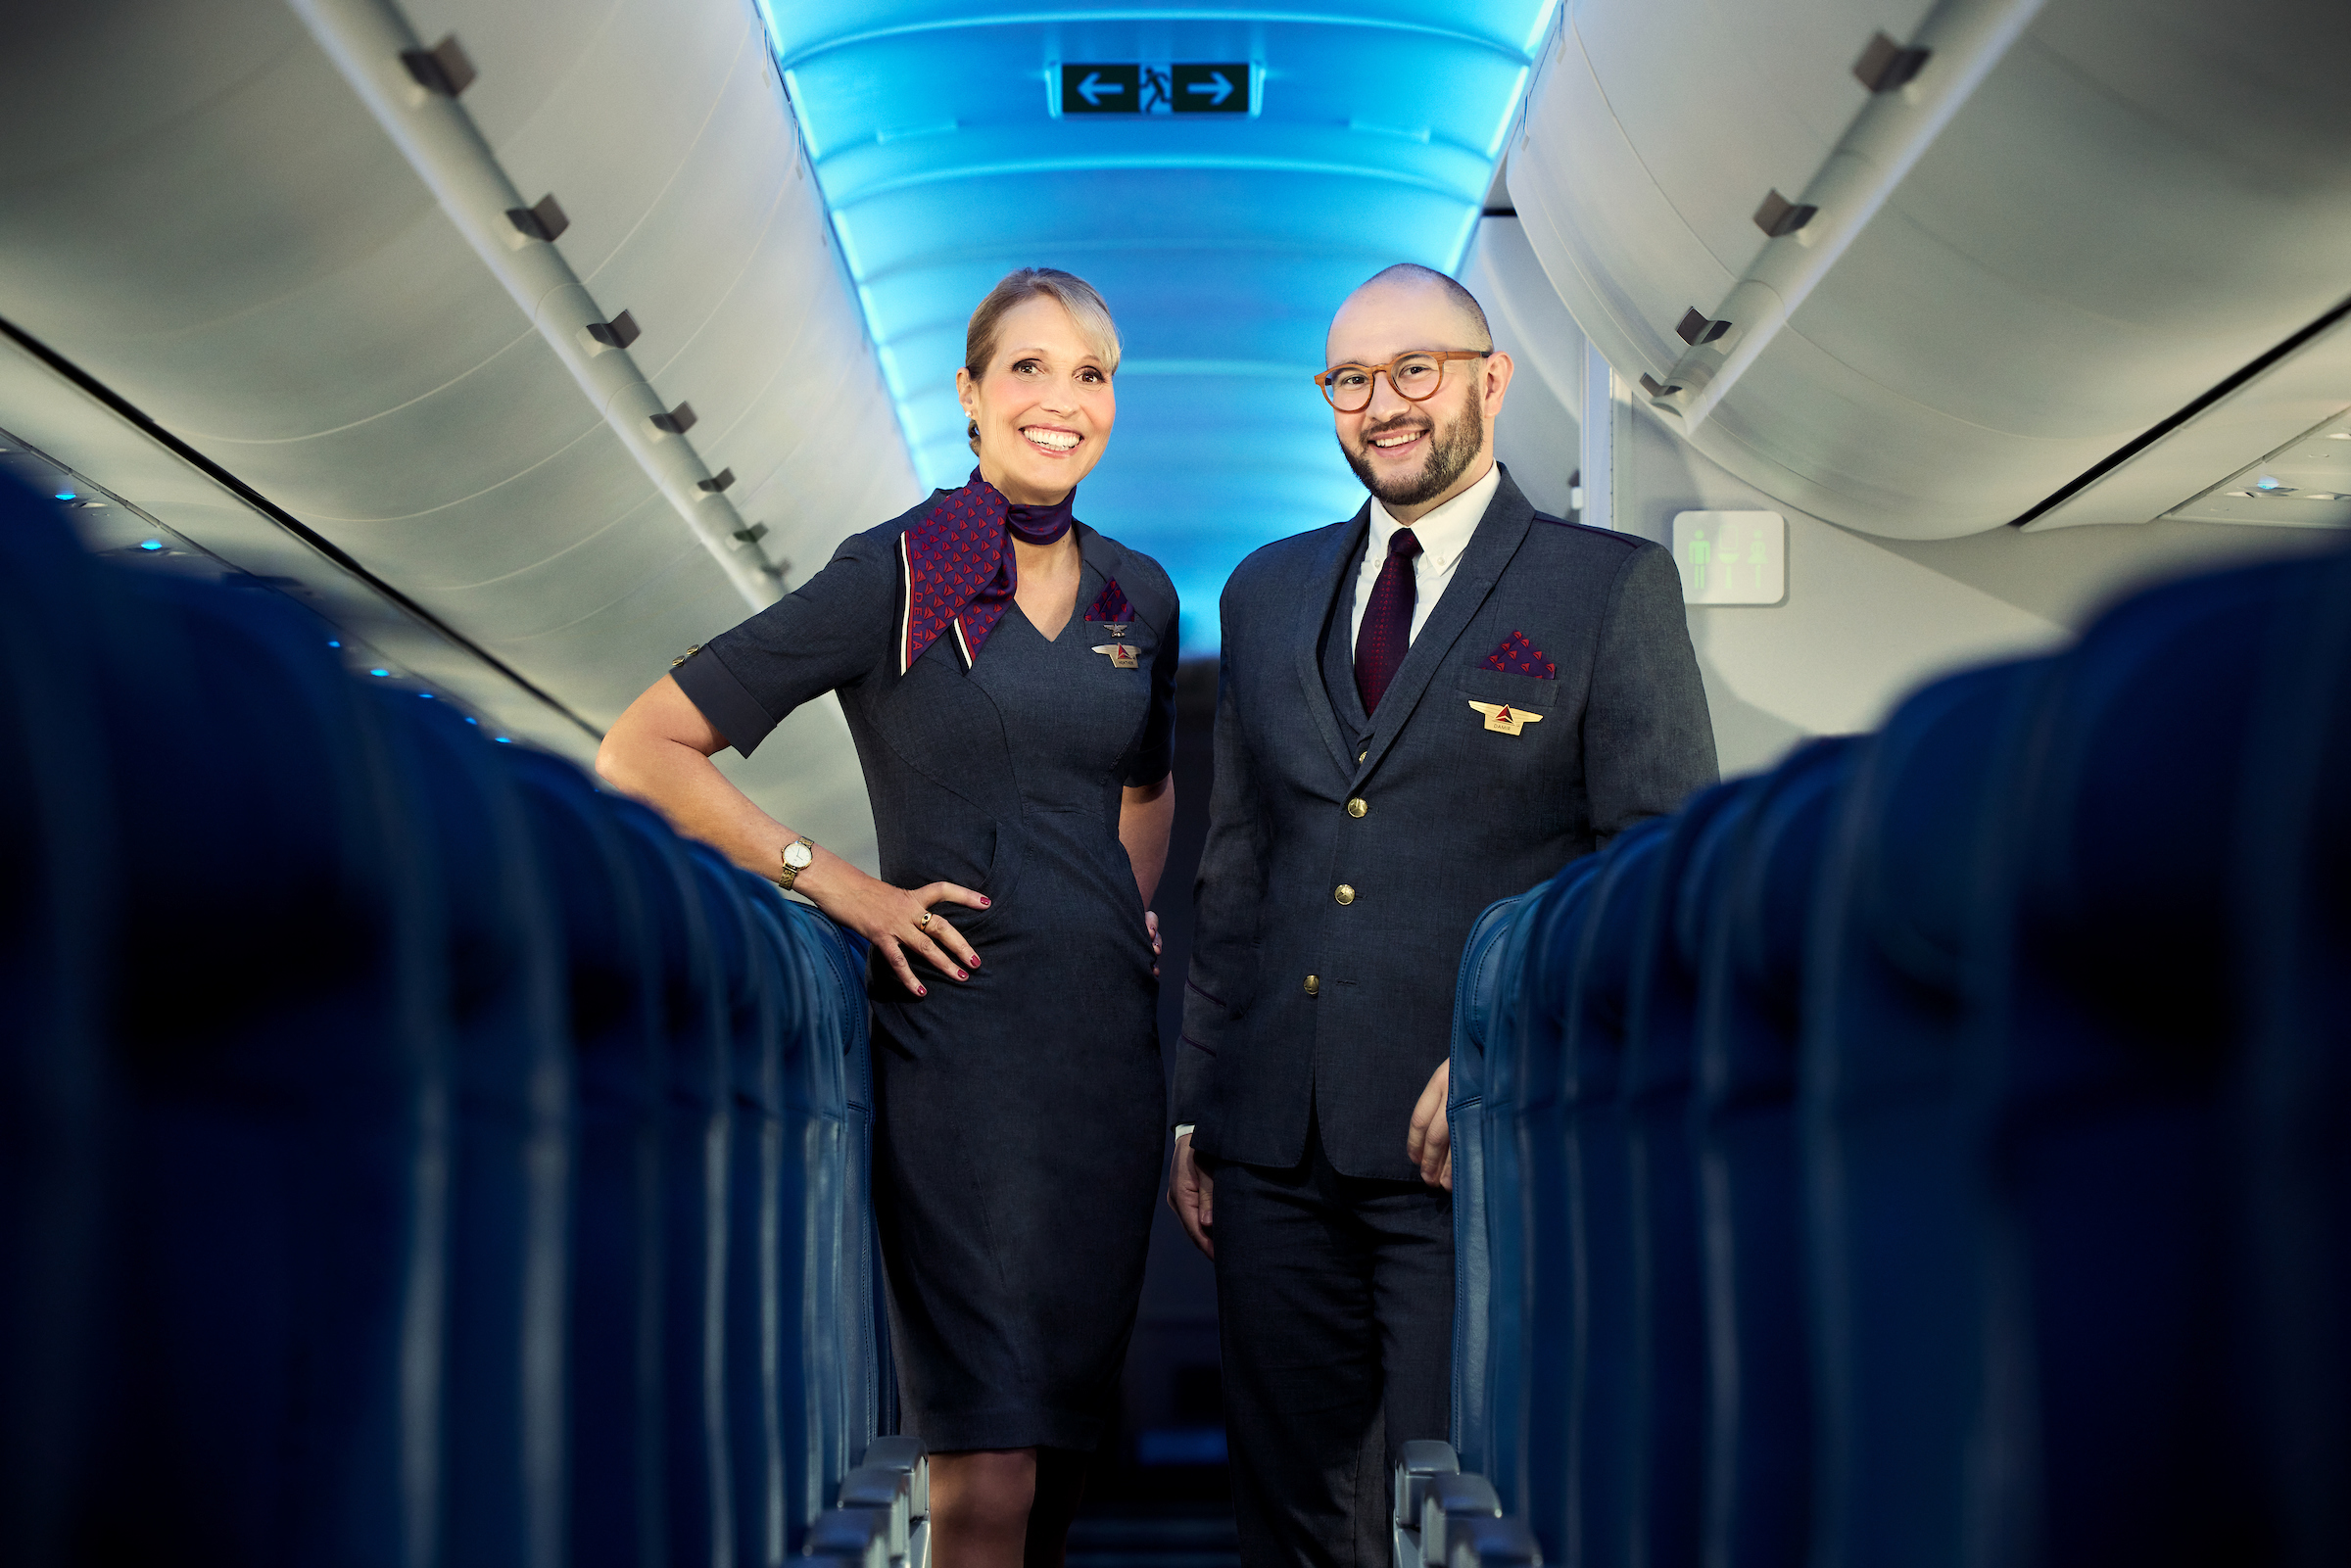 Is The Flight Attendant Accurate? Two Real Flight Attendants Weigh